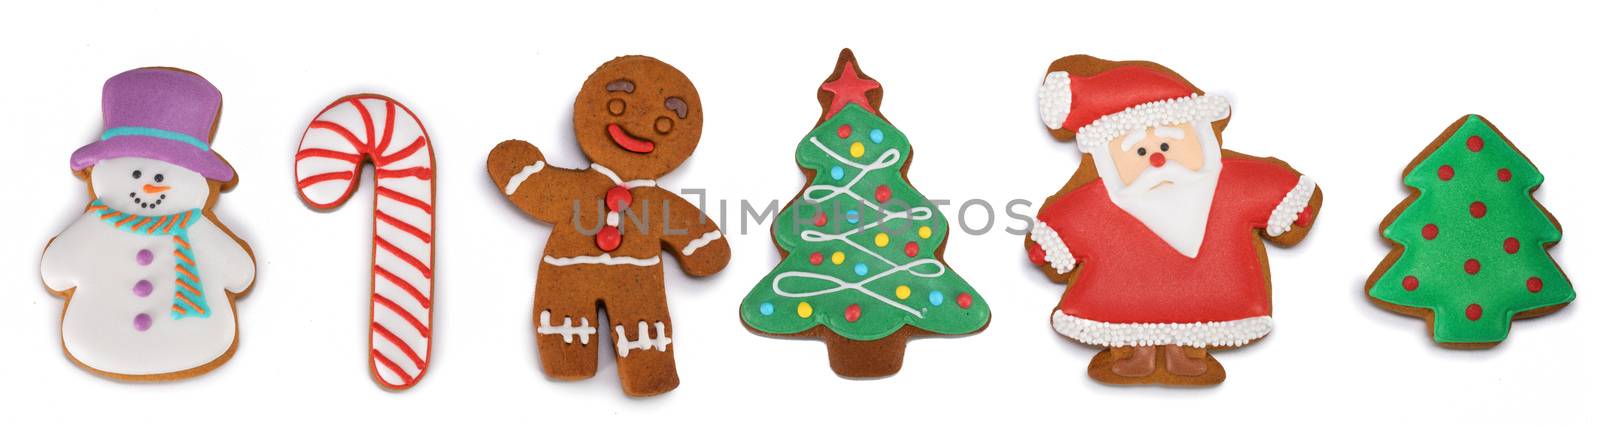 Gingerbread cookies on white by Yellowj